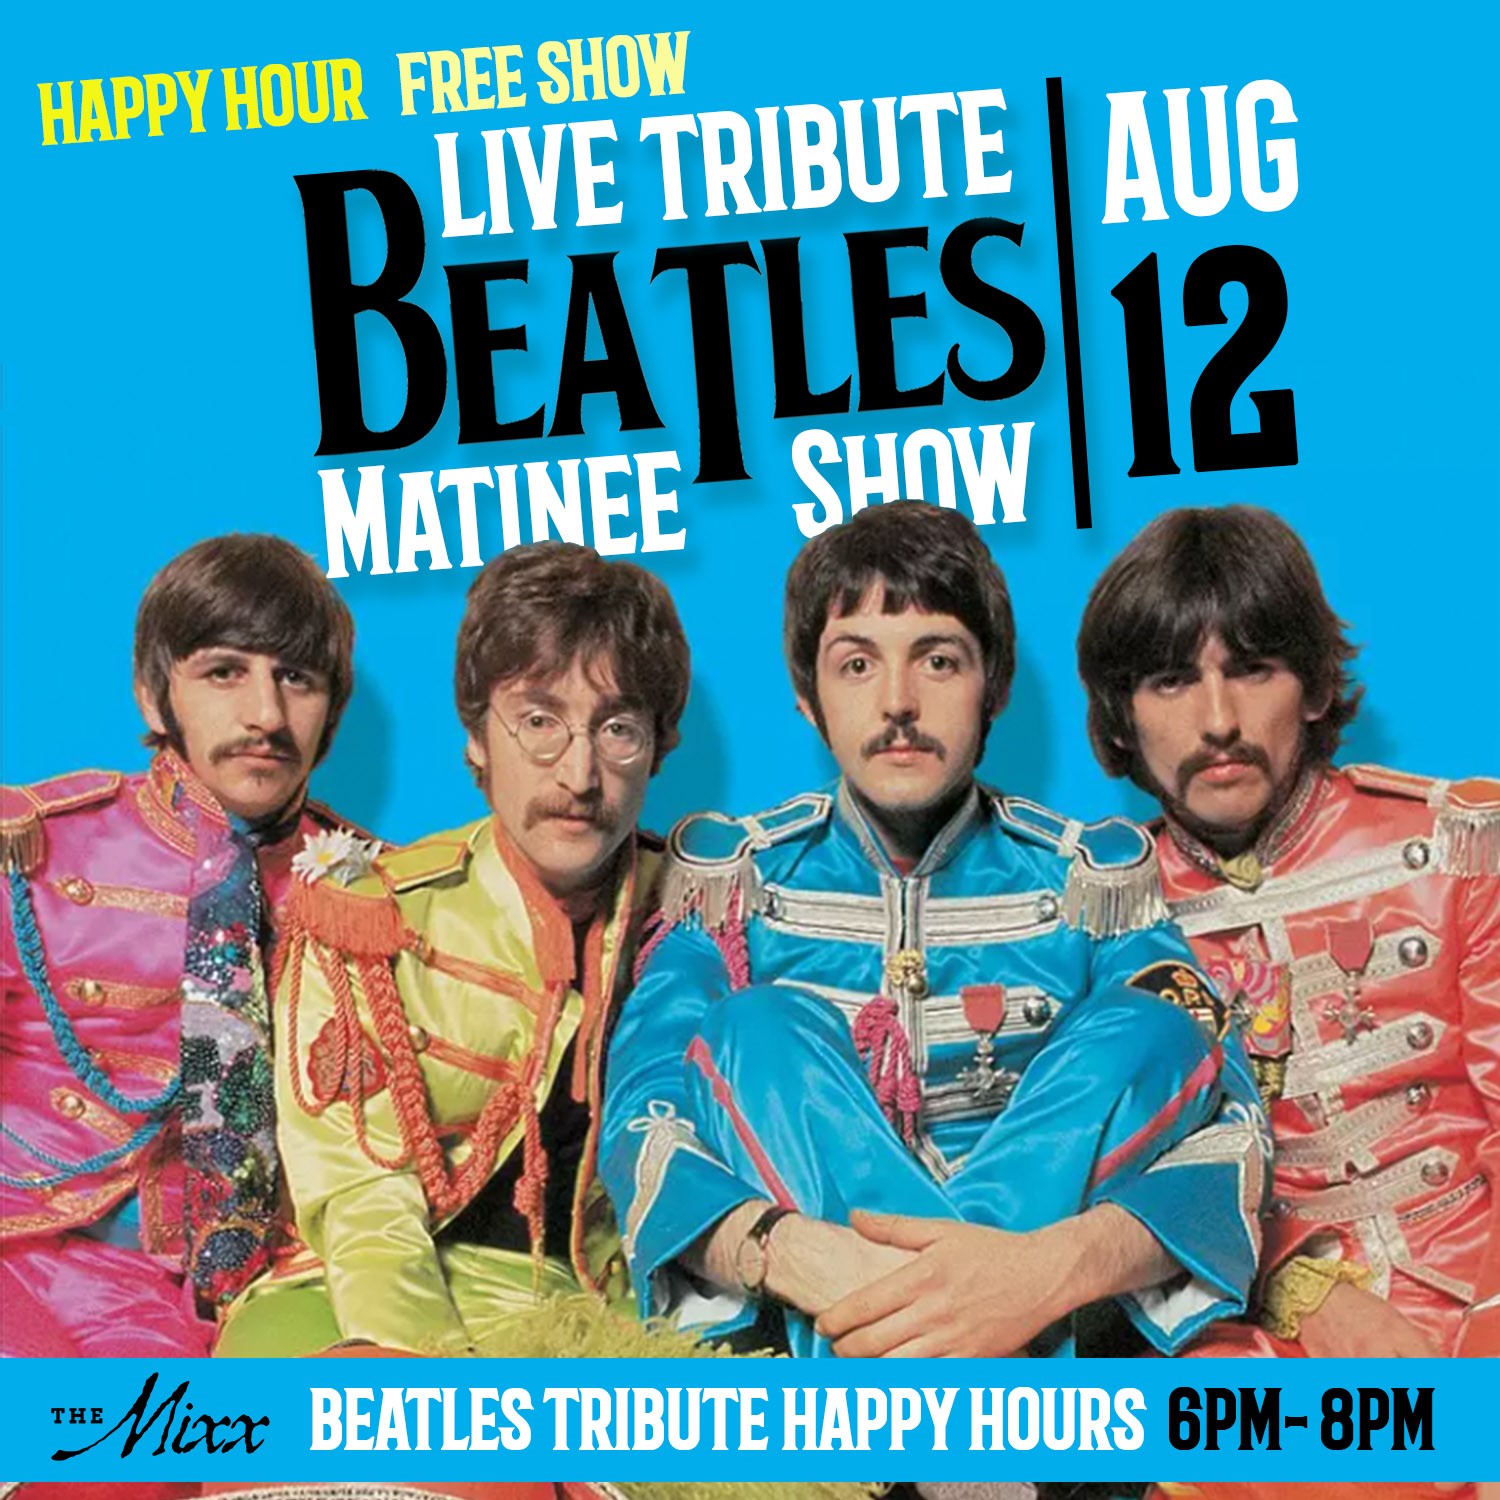 You are currently viewing Beatles Matinee Happy Hour Tribute Show